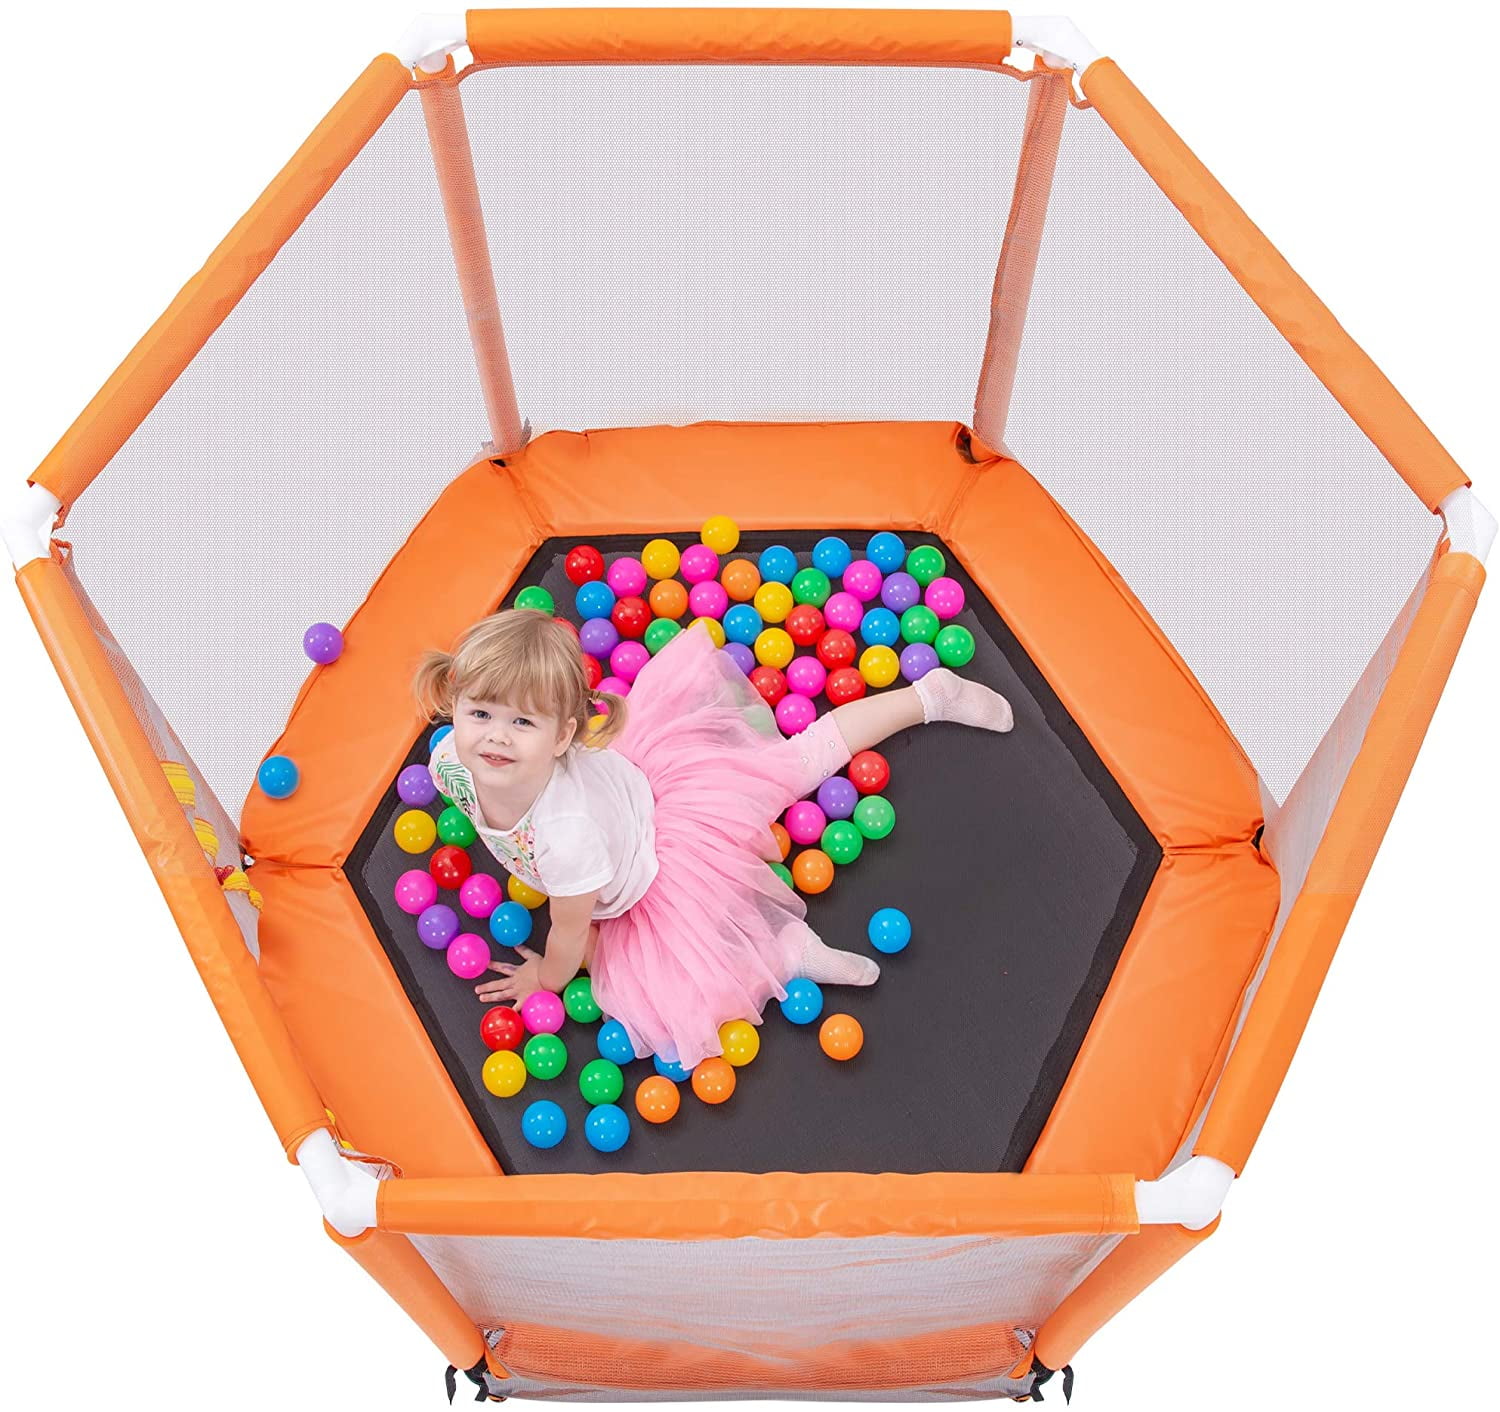 Kids Trampoline 55inch with Safety Enclosure Net & Spring Pad and Ball Pit Ball, Indoor Outdoor Mini Trampoline for Toddlers - Orange